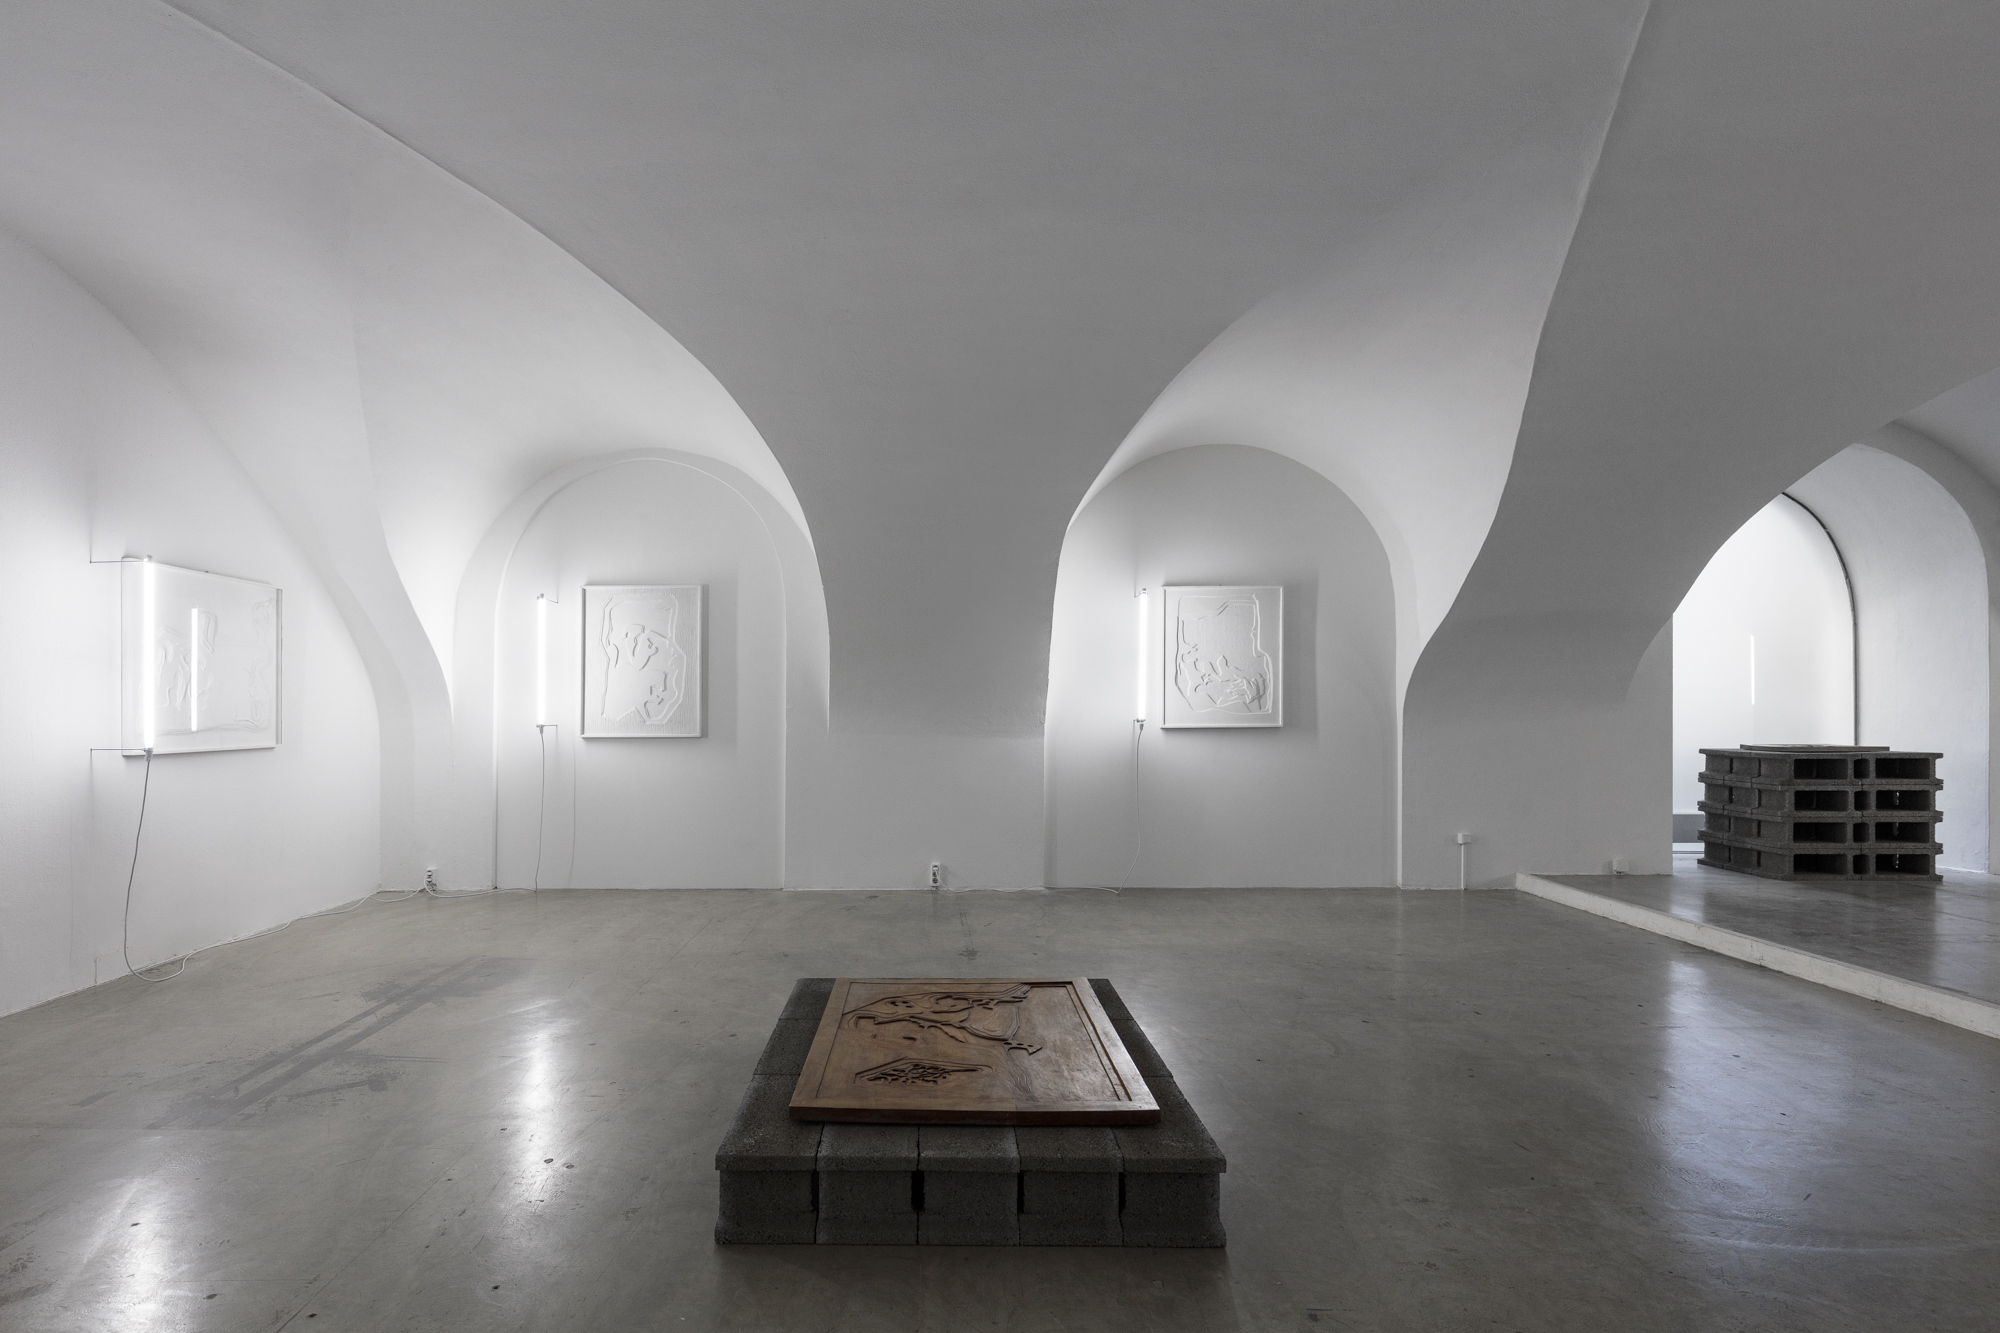 Ezio Gribaudo, The Weight of the Concrete, in a scenography by Davide Stucchi at Grazer Kunstverein, 2023. Courtesy: the Archivio Gribaudo, Davide Stucchi and Grazer Kunstverein. Photo: kunst-dokumentation.com